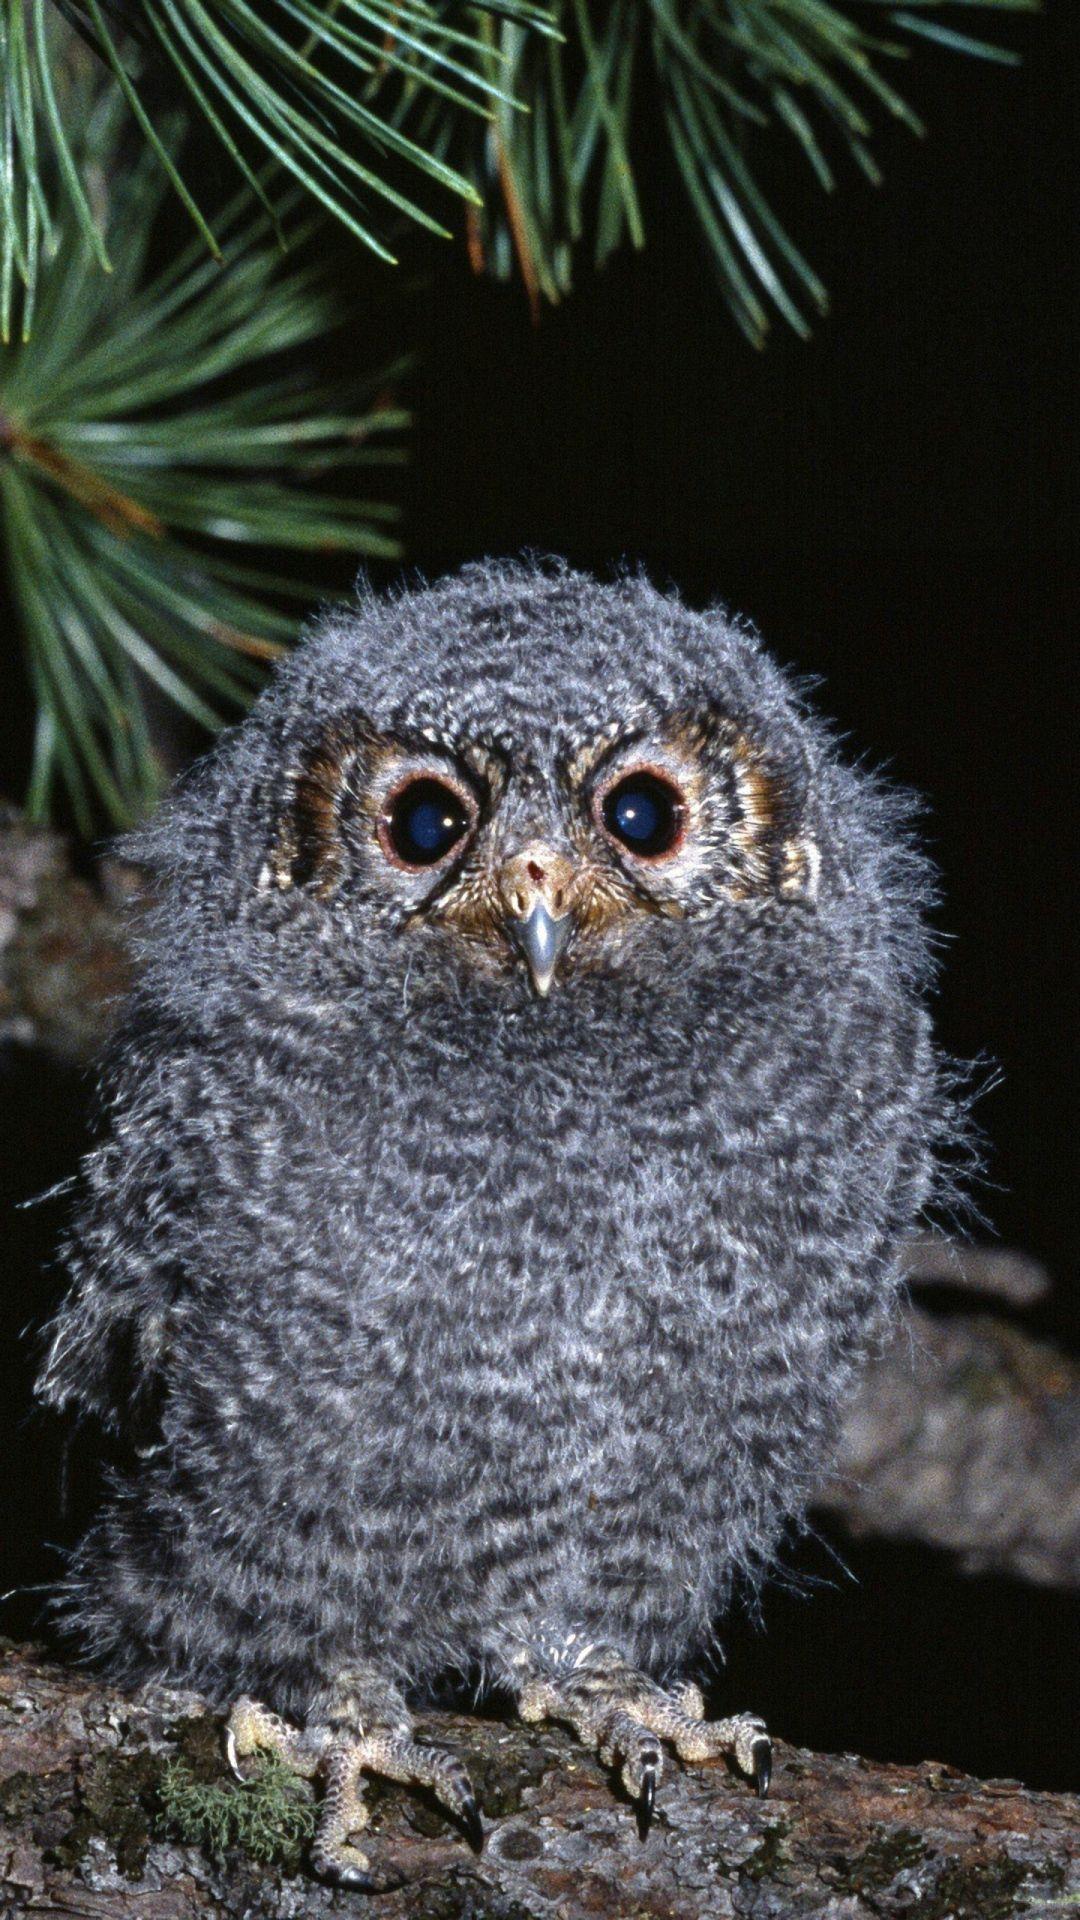 Wallpaper.wiki Cute Baby Owl Gallery For Android PIC WPB001741